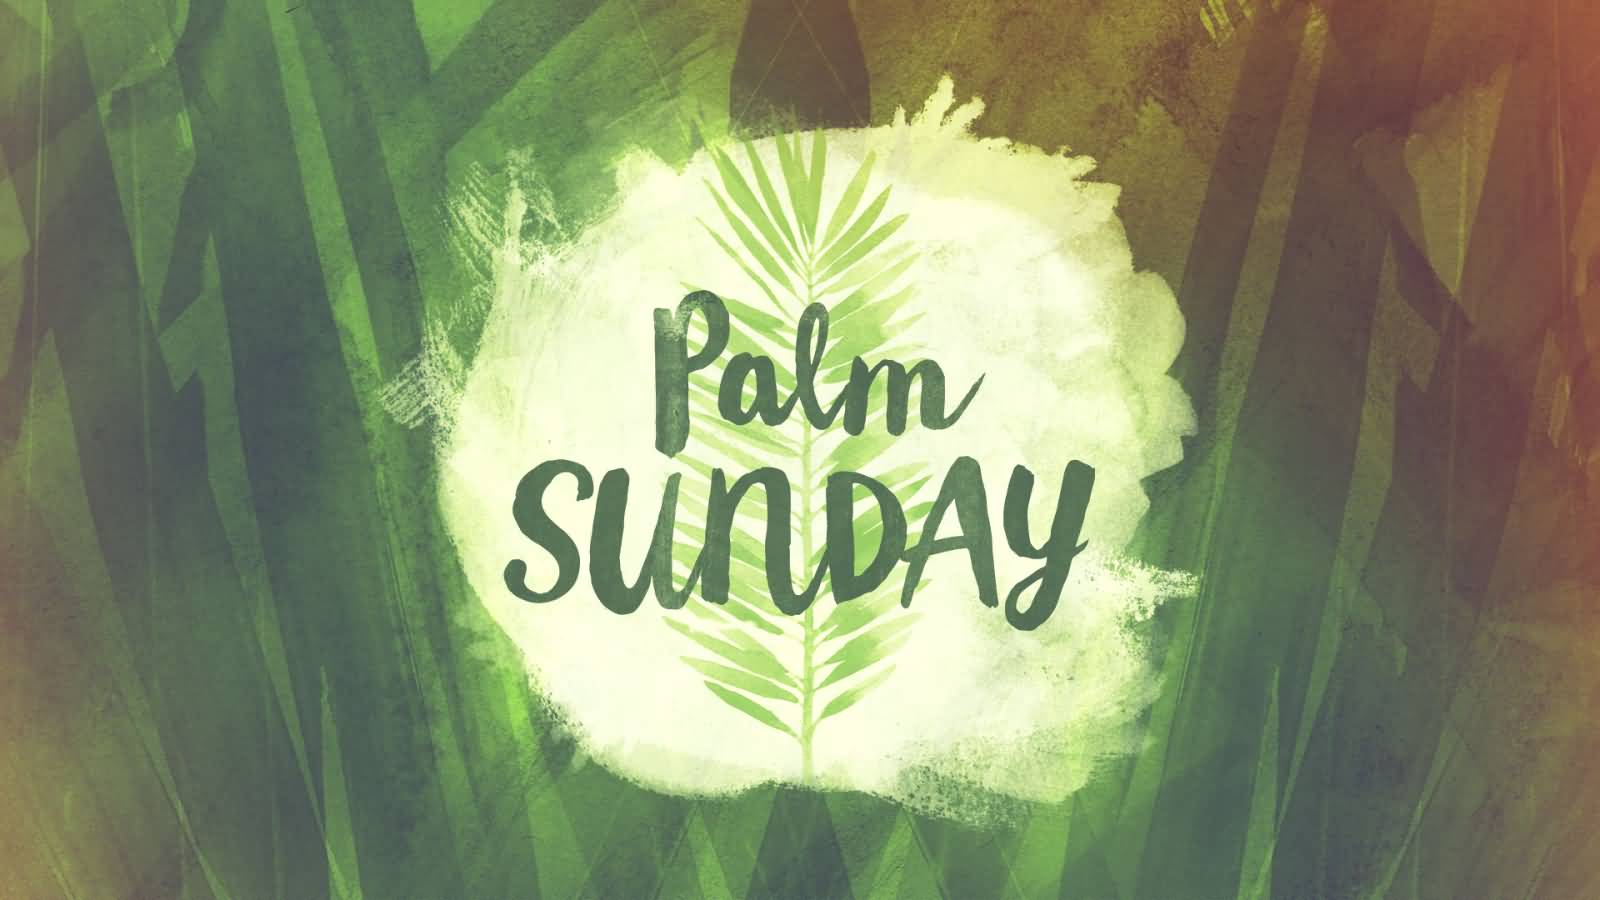 Beautiful Palm Sunday Greeting Pictures And Image